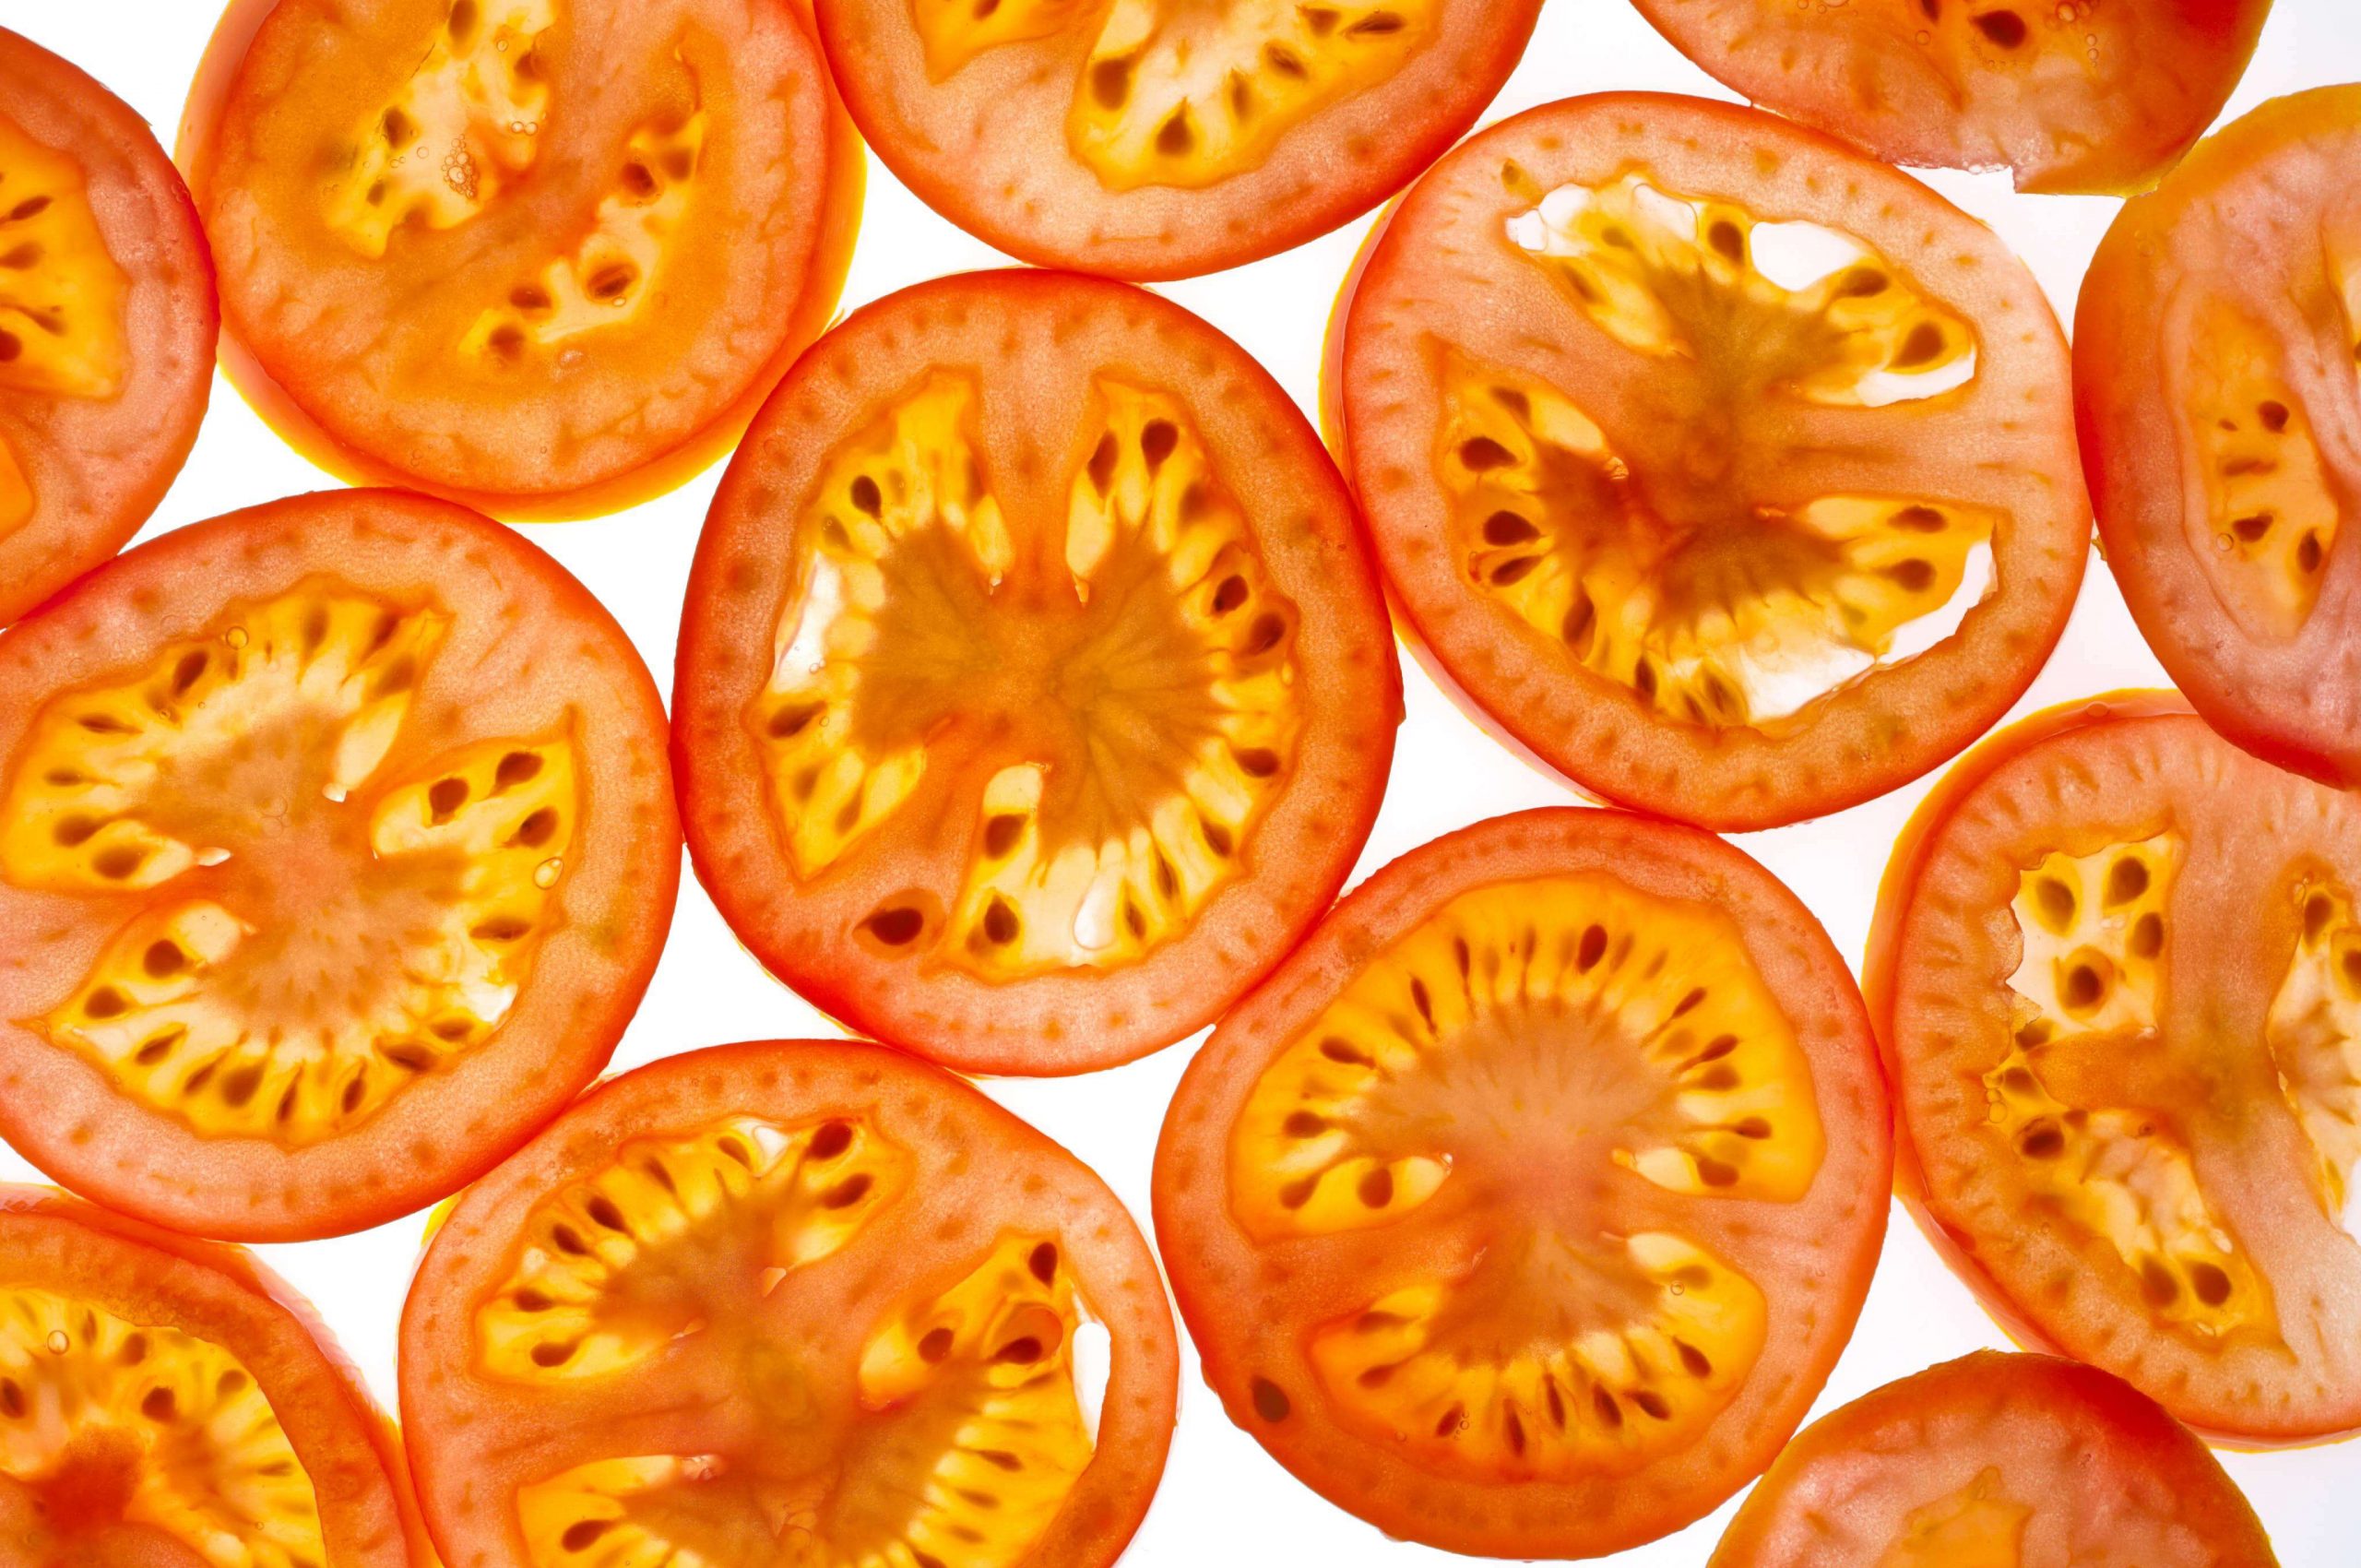 Detail of a layer of tomatoes. They are bright red on a white background.